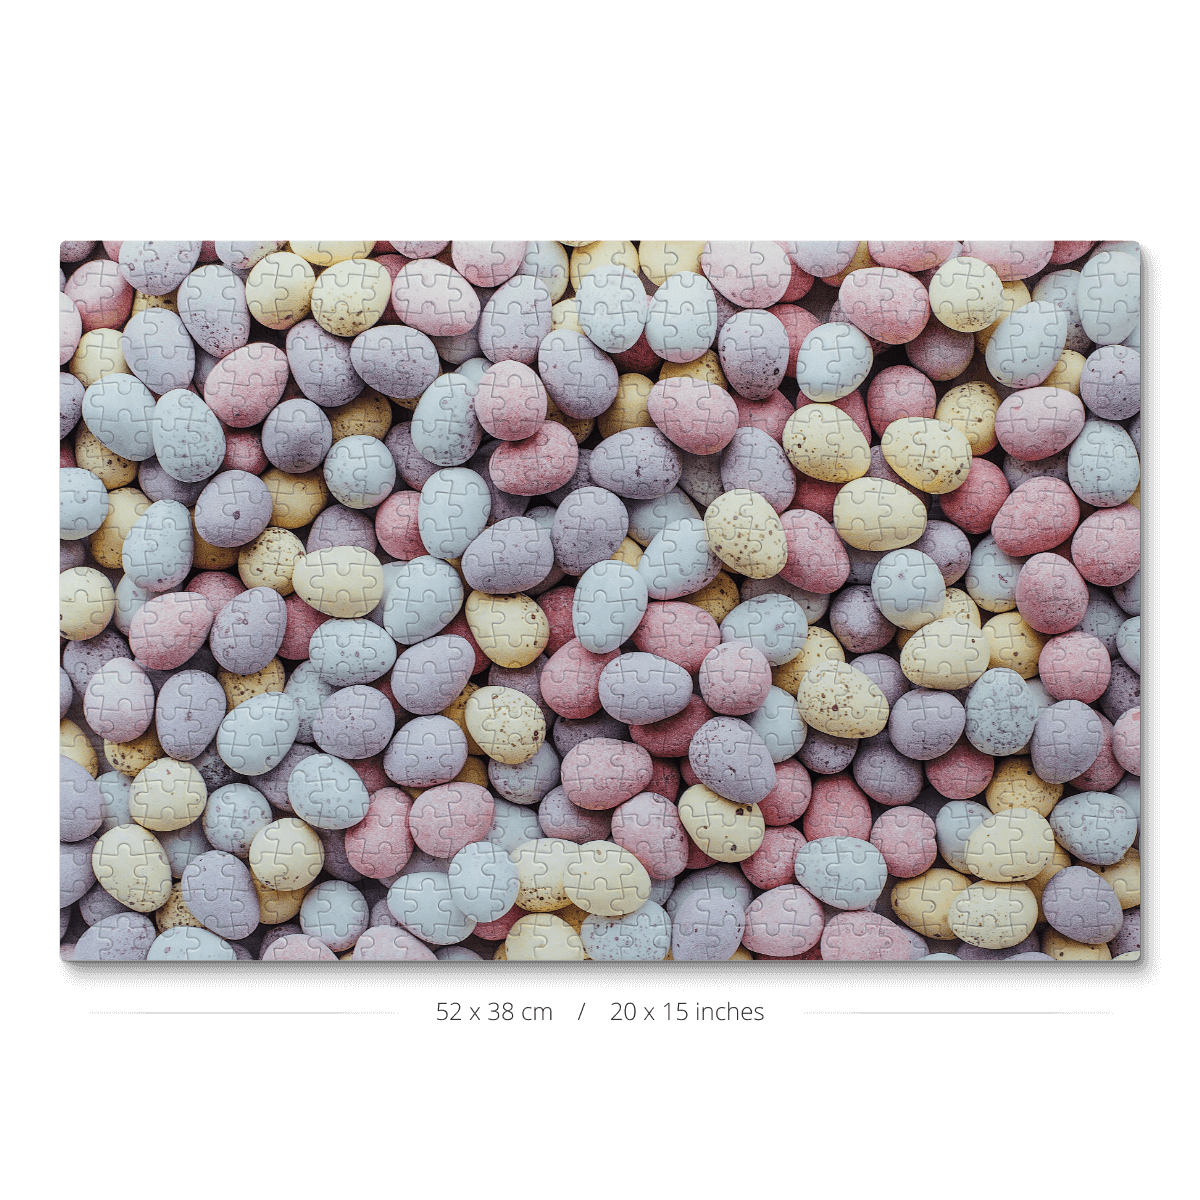 A 500-piece jigsaw puzzle featuring pastel-colored chocolate eggs.